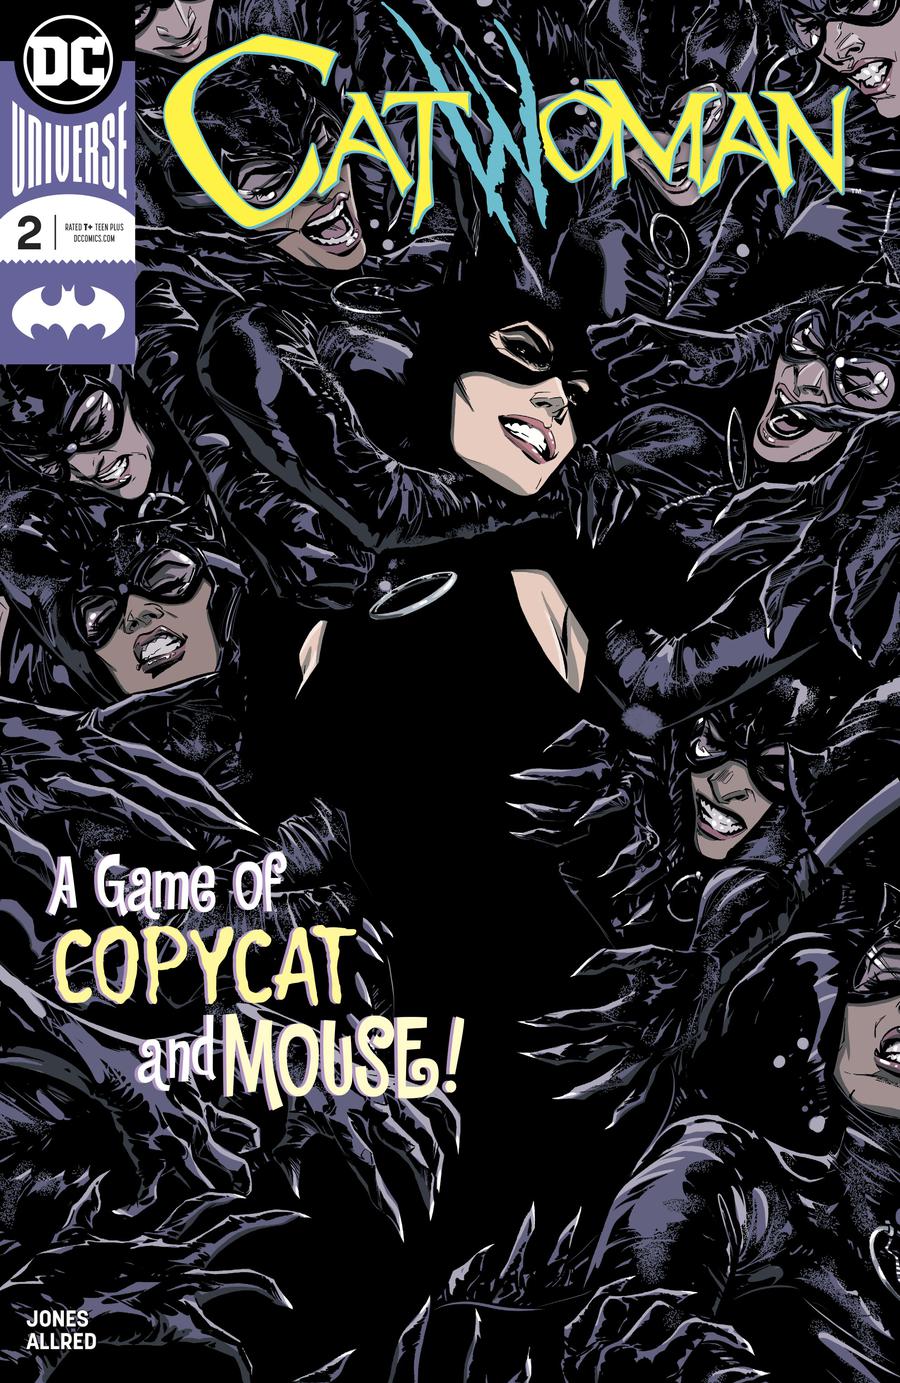 Catwoman #2 [2018]